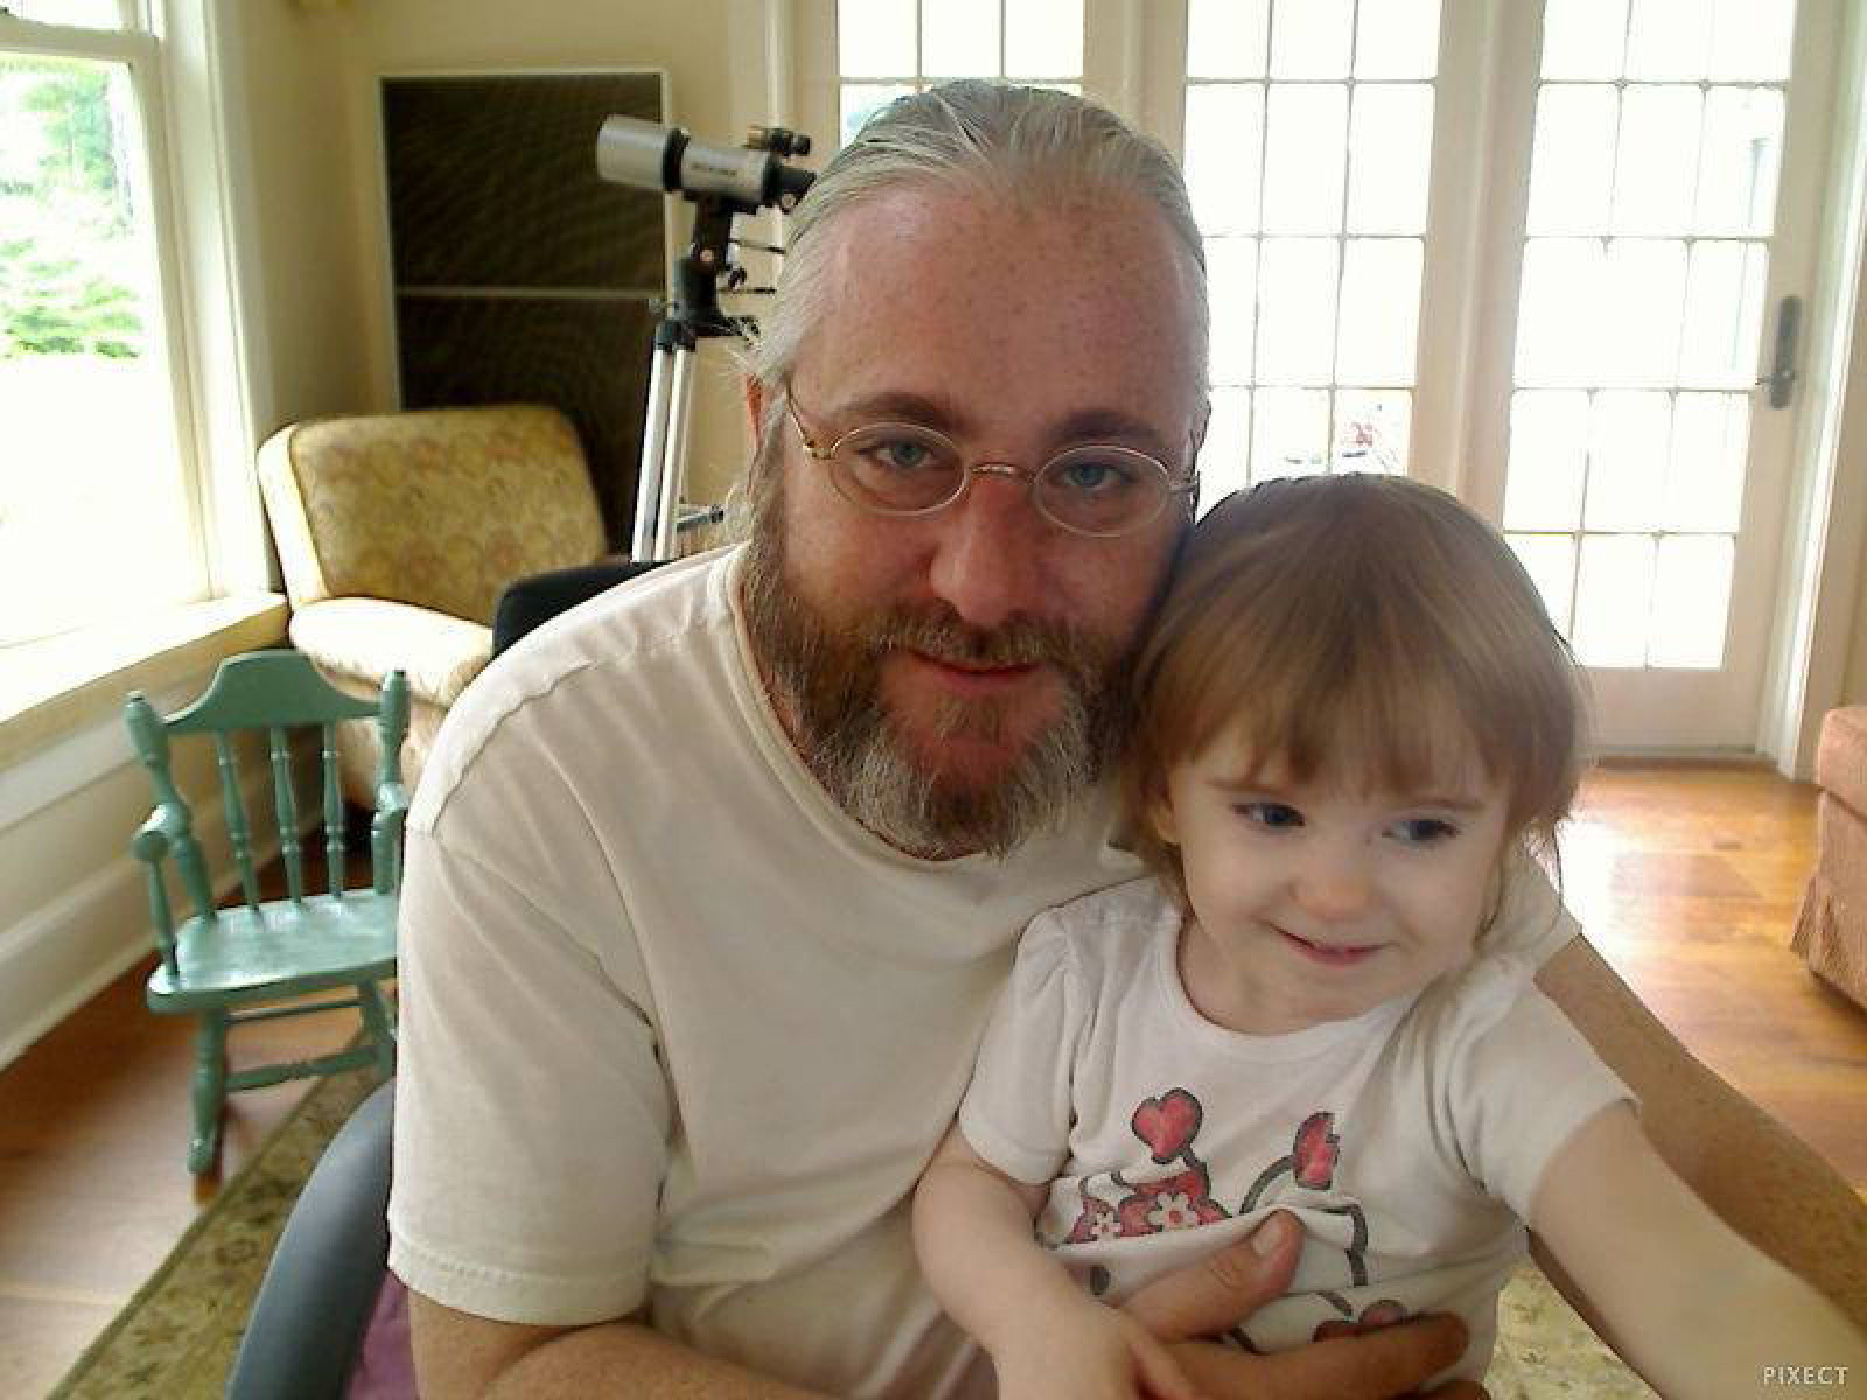 William Rivers Pitt with his daughter, Lola.